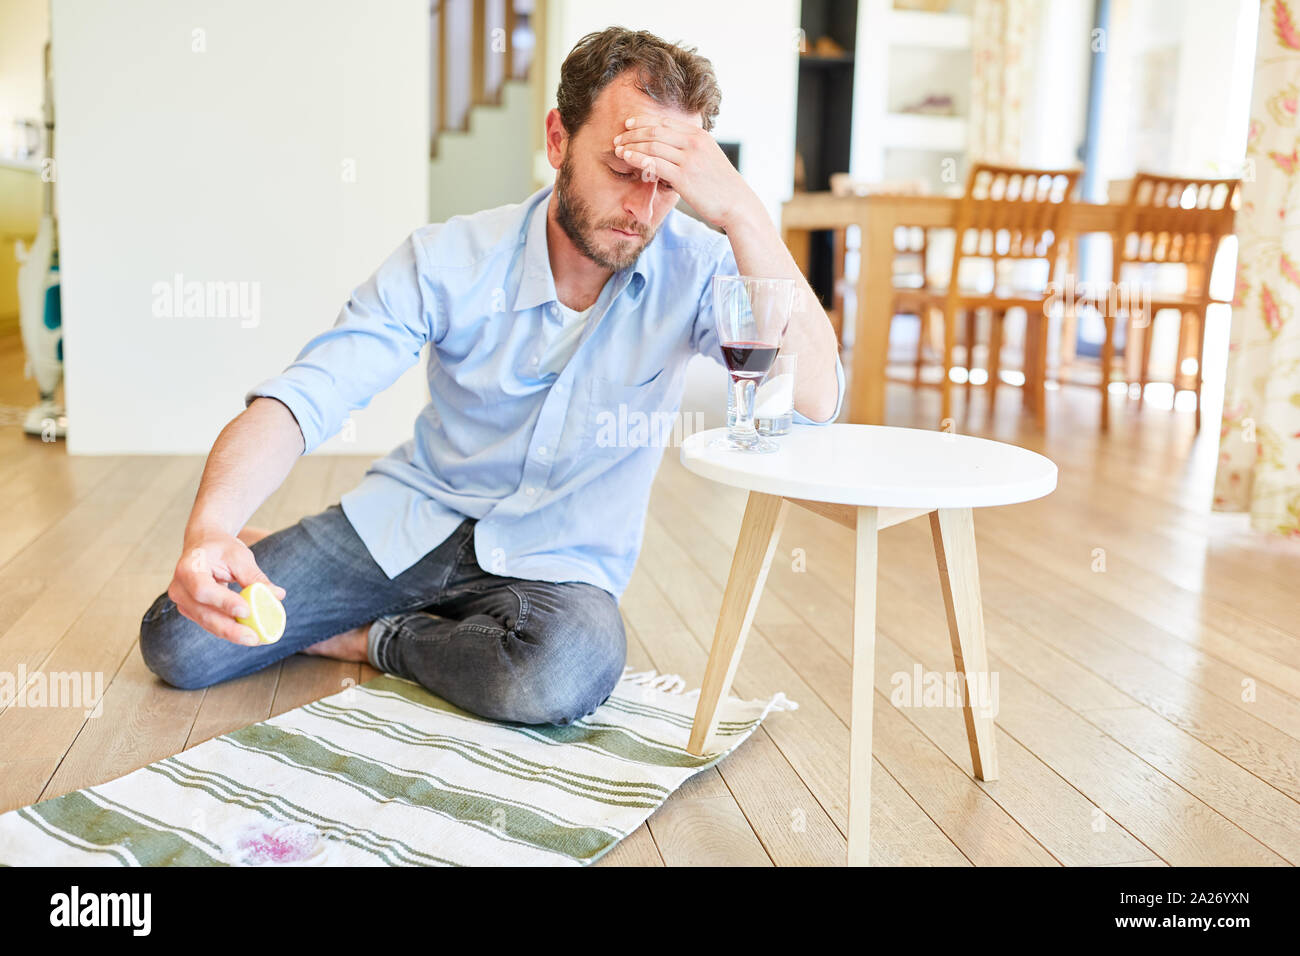 Hausmann sits frustrated in front of a carpet with red wine patches at home Stock Photo